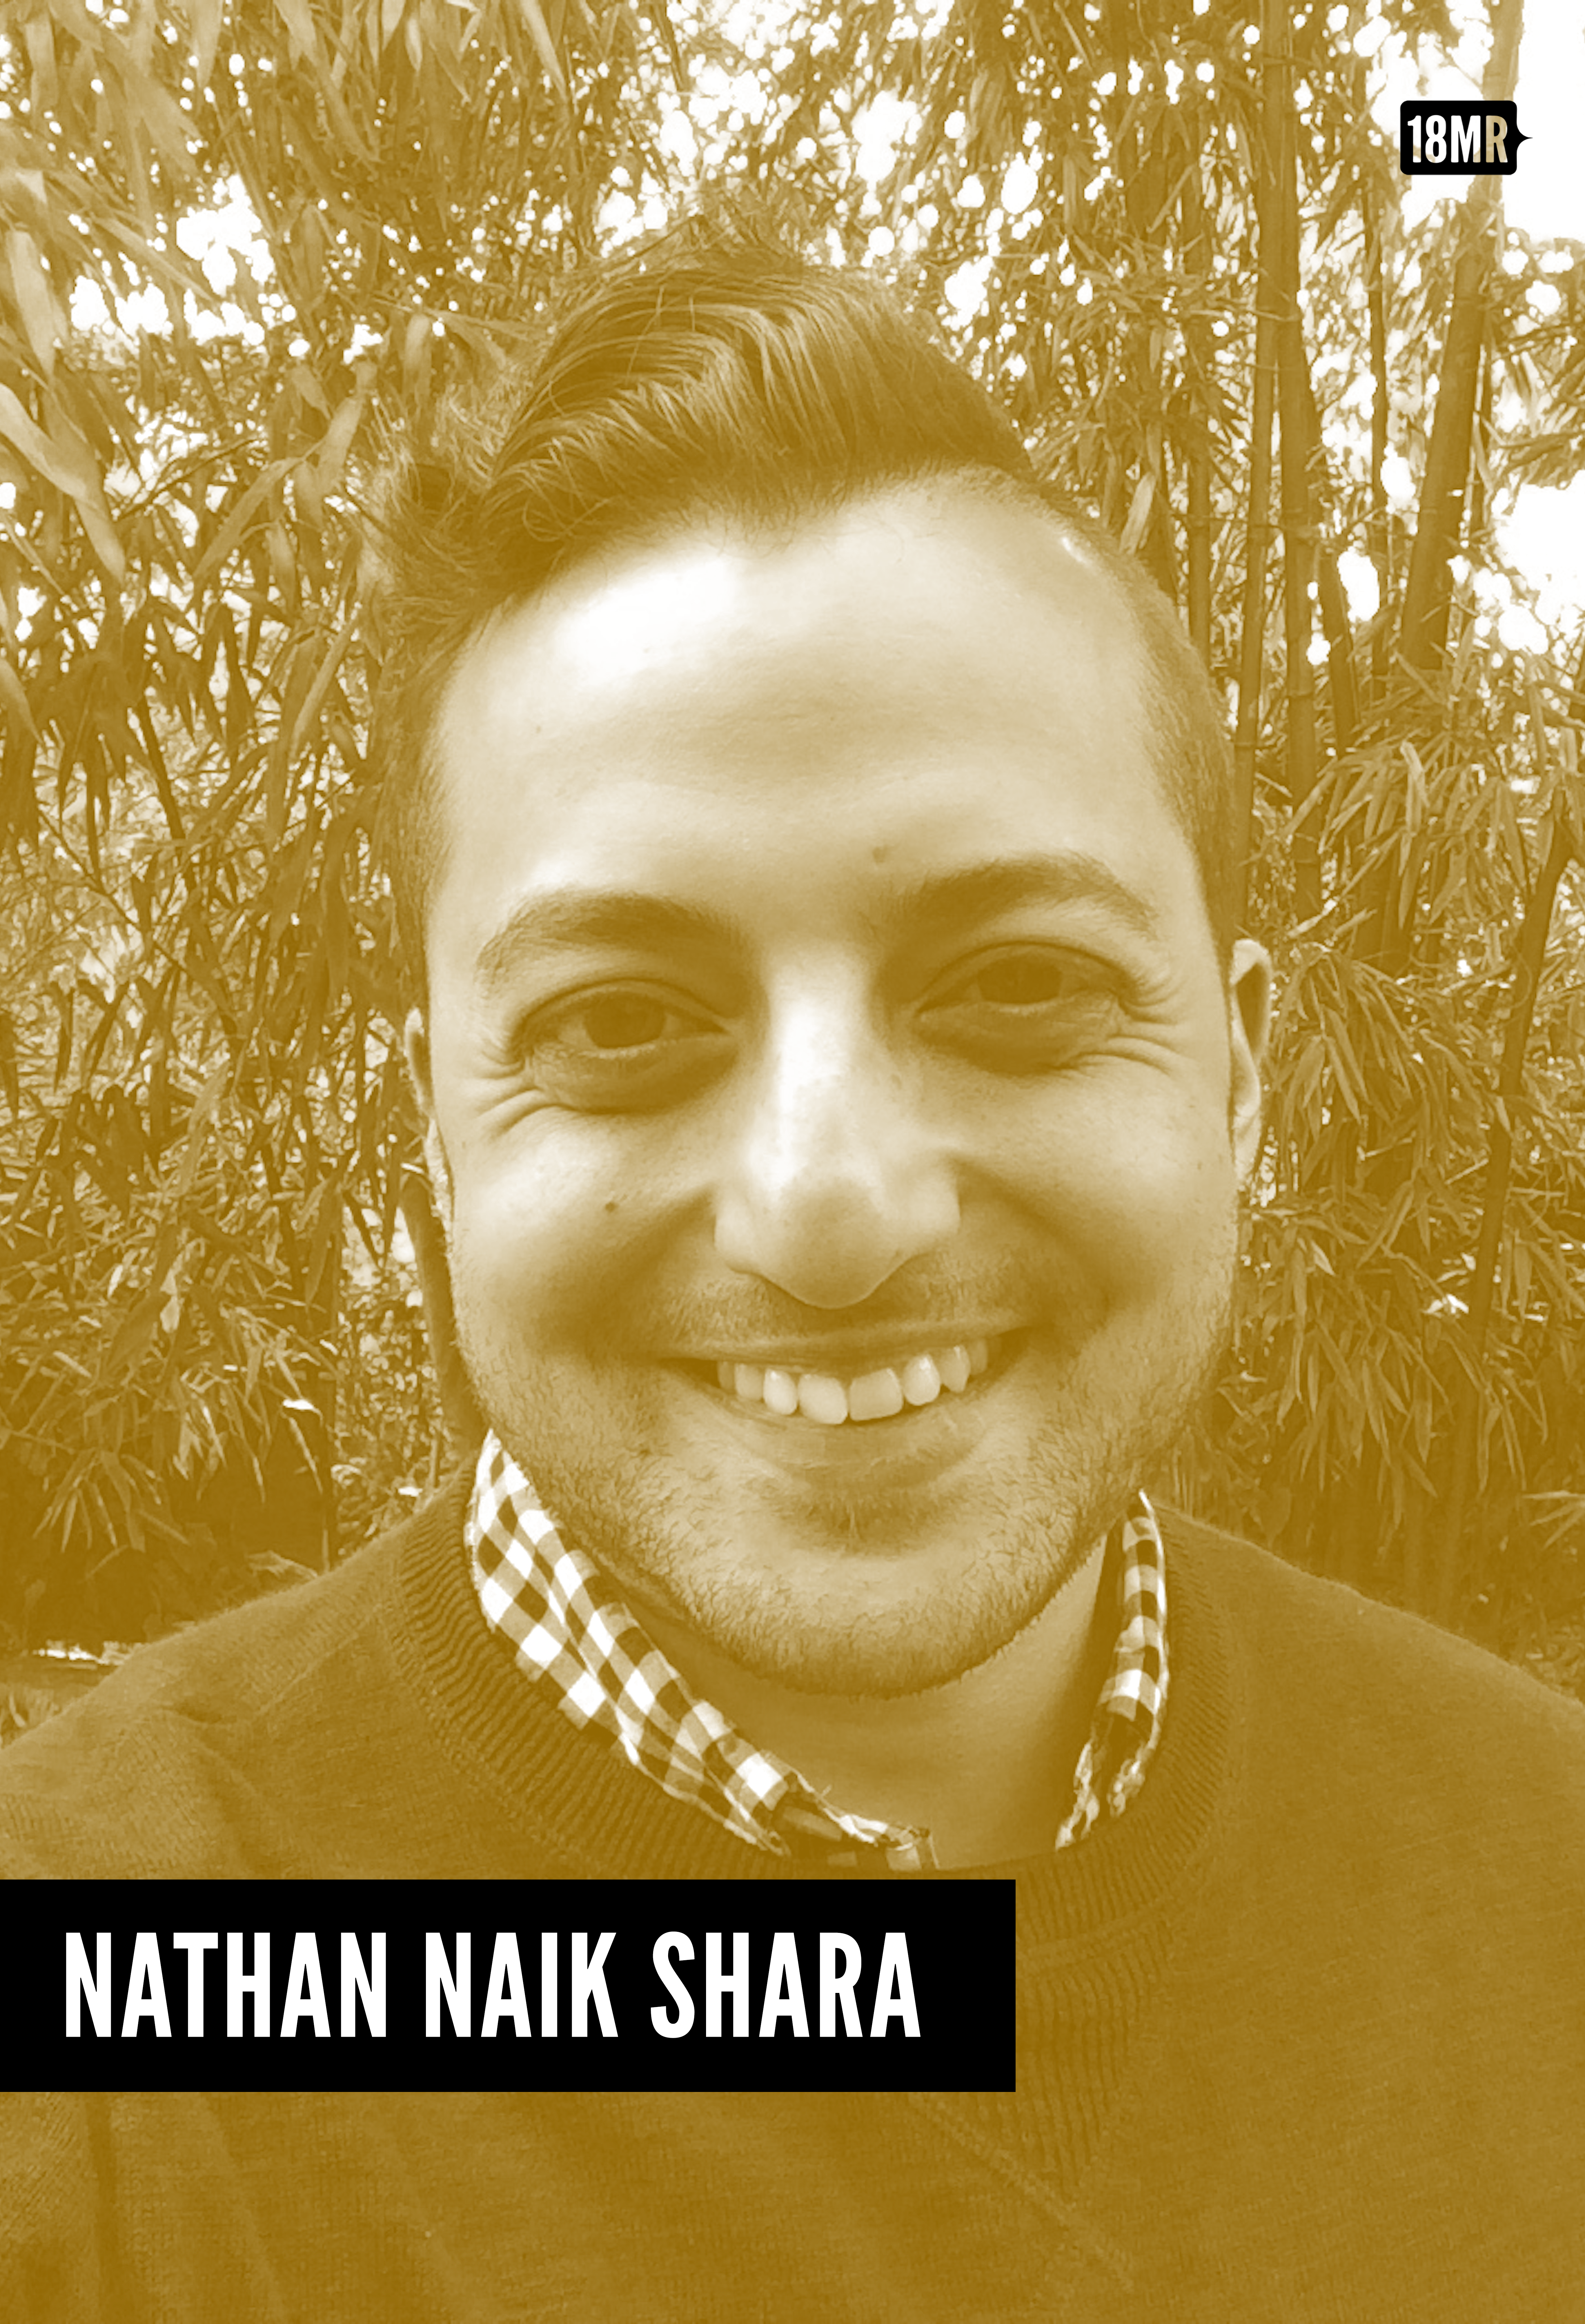 Headshot of a trans and queer South Asian person smiling with a yellow wash over the image. Bold text reads, “WHAT IS HEALING FOR ASIAN AMERICANS?” and “NATHAN NAIK SHARA, GENERATIVE SOMATICS TEACHER.”